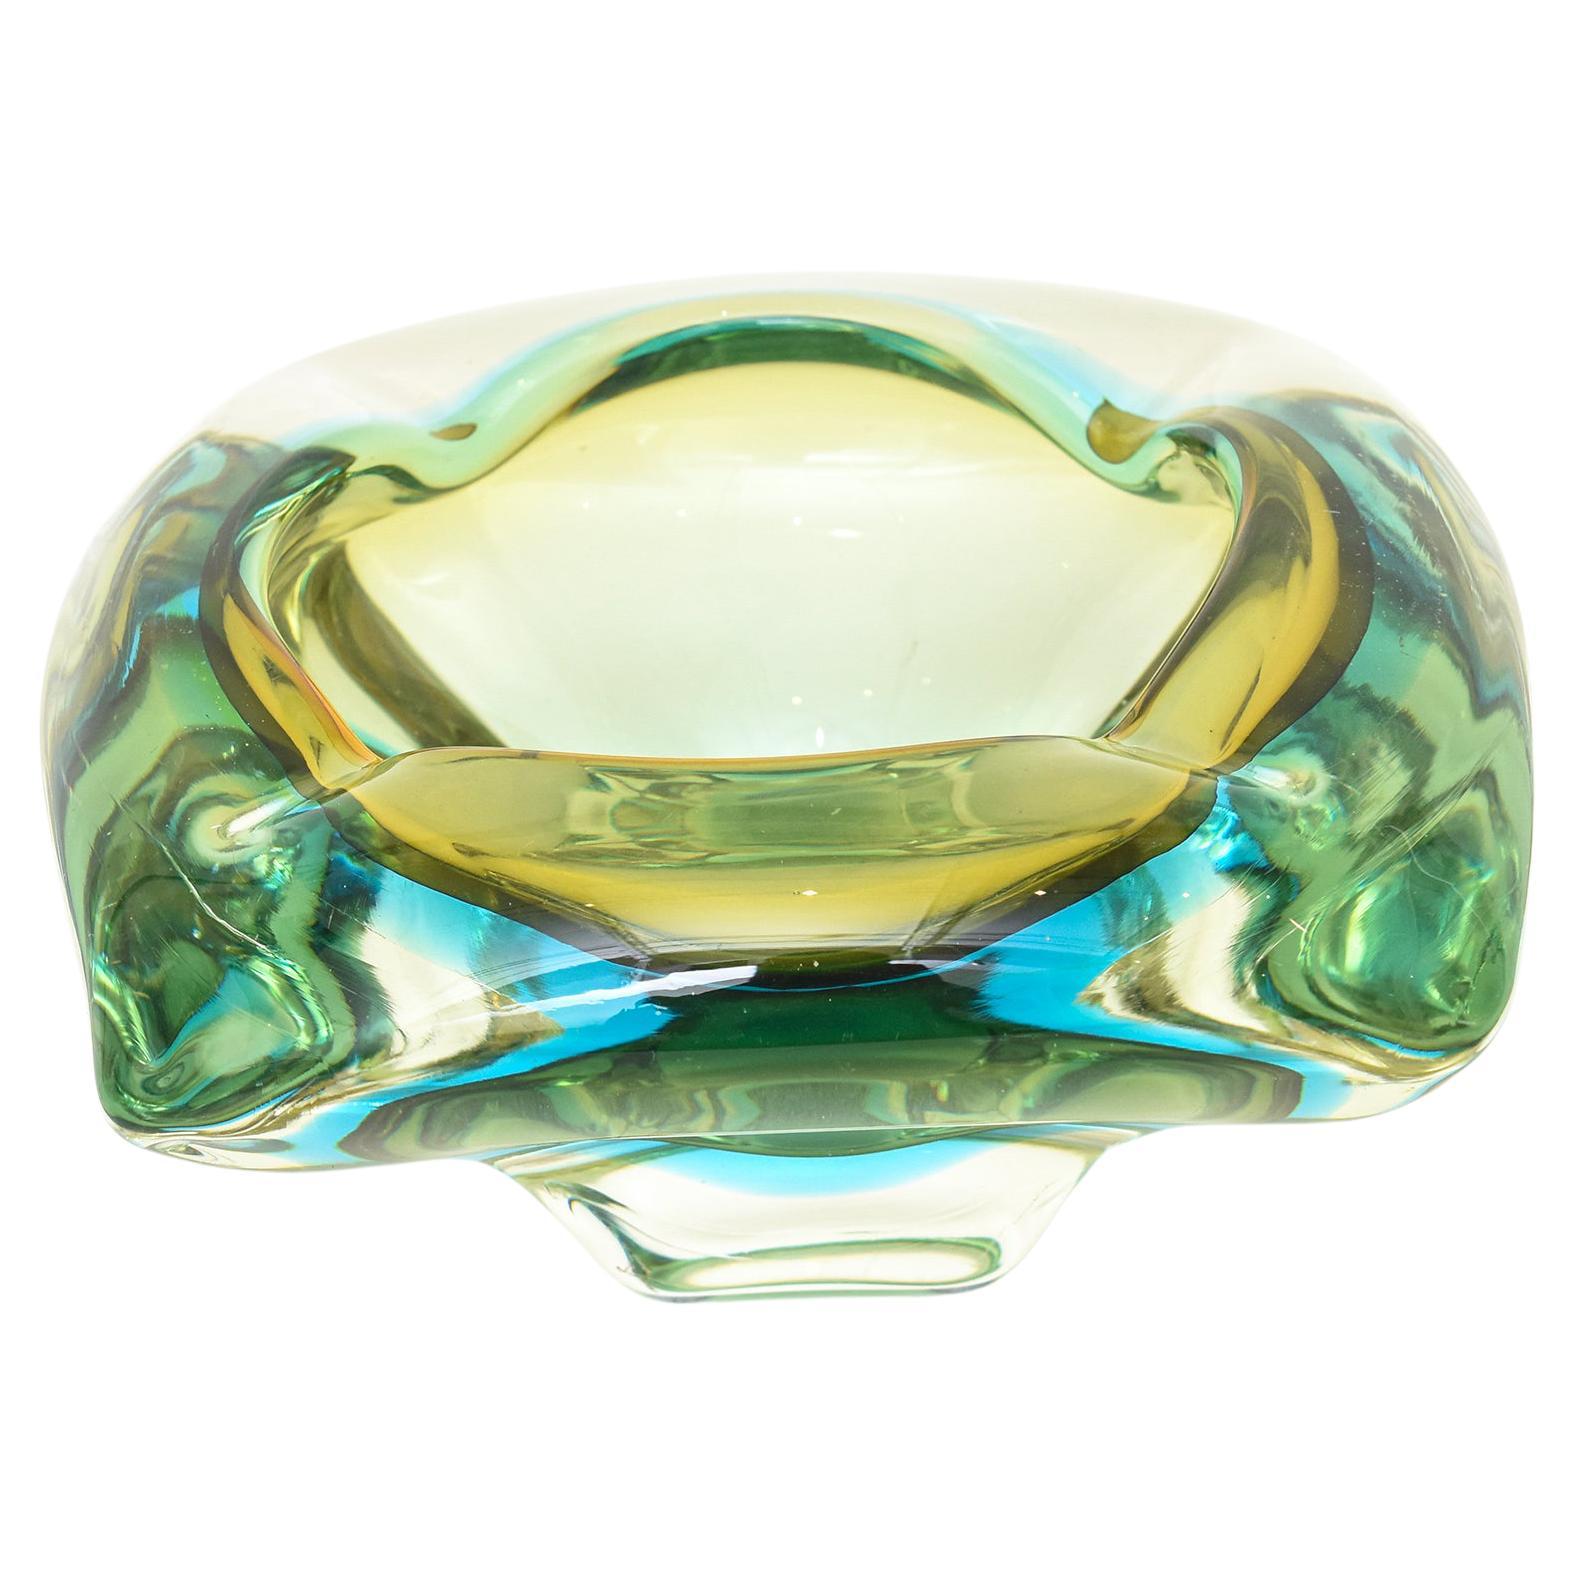 Flavio Poli Vintage Murano Sommerso Turquoise and Green Glass Bowl Or Ashtray For Sale